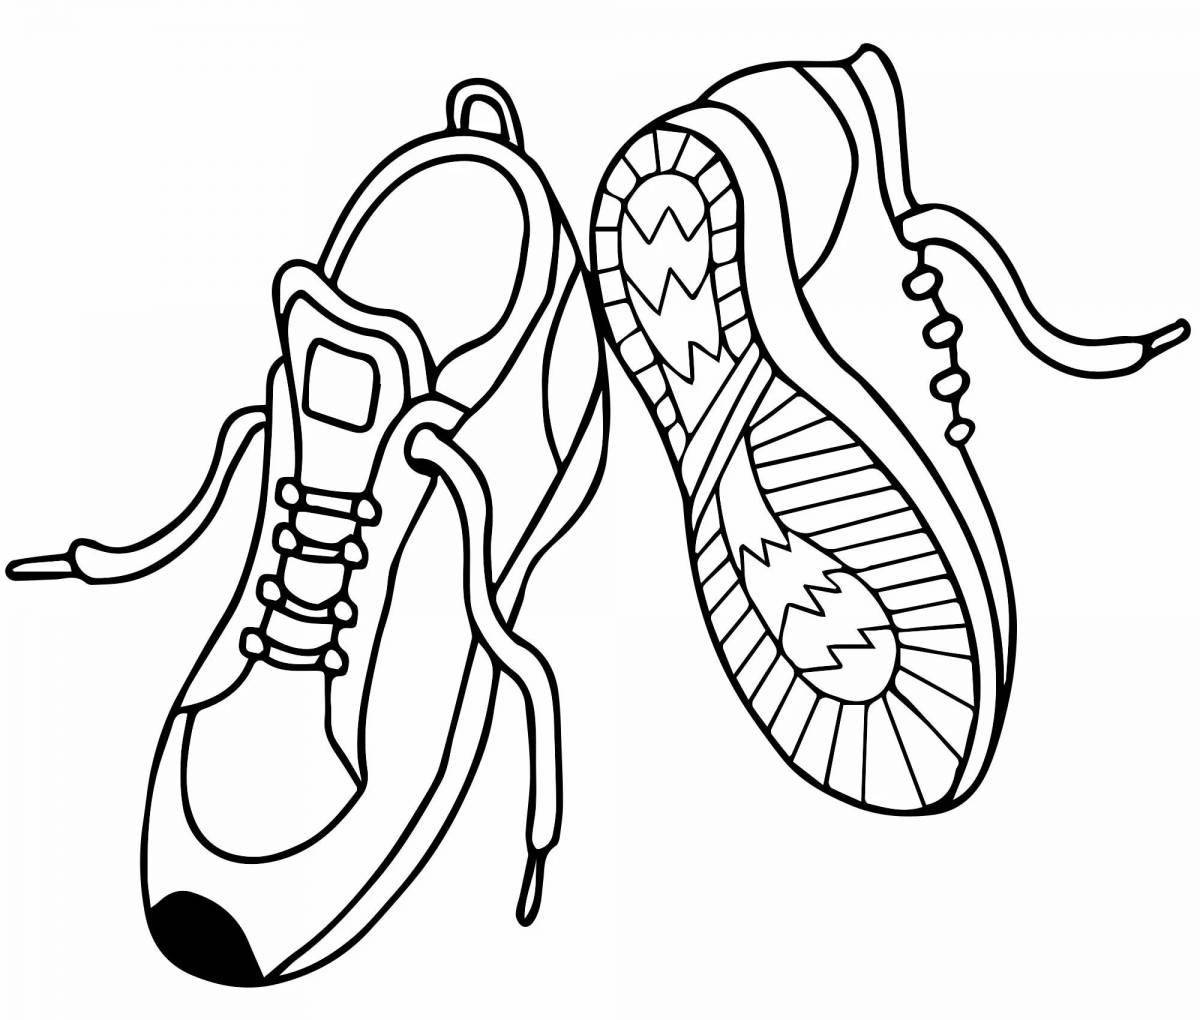 Adorable clothes and shoes coloring page